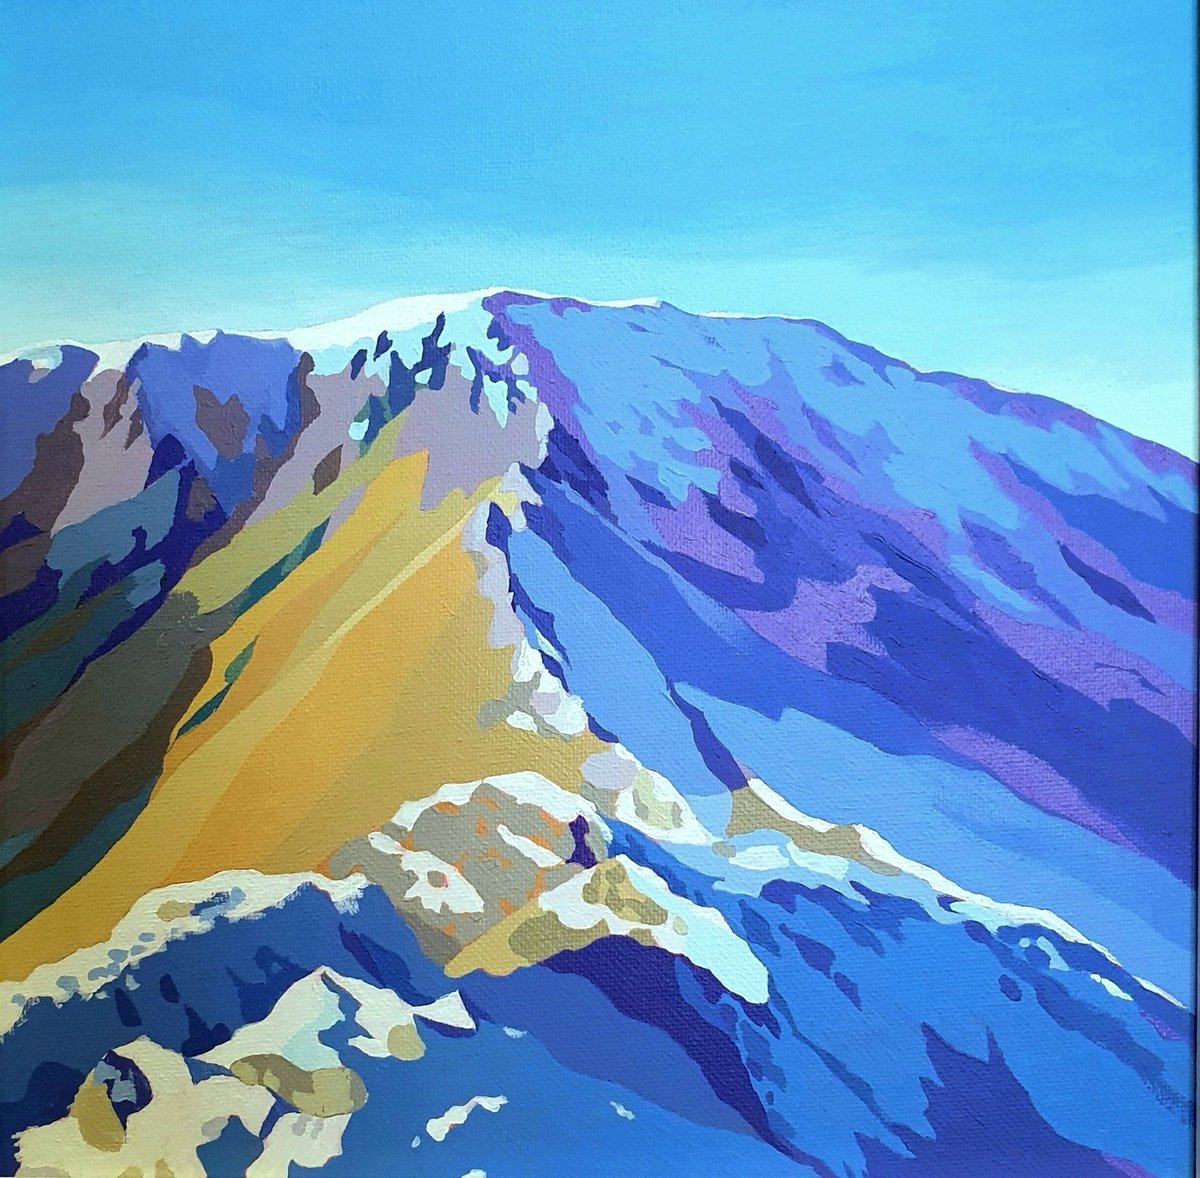 Striding Edge, Helvellyn, #LakeDistrict 
Acrylic painting (some fun painting for a break before I get back into commissions!) #lovemountains #artistsontwitter